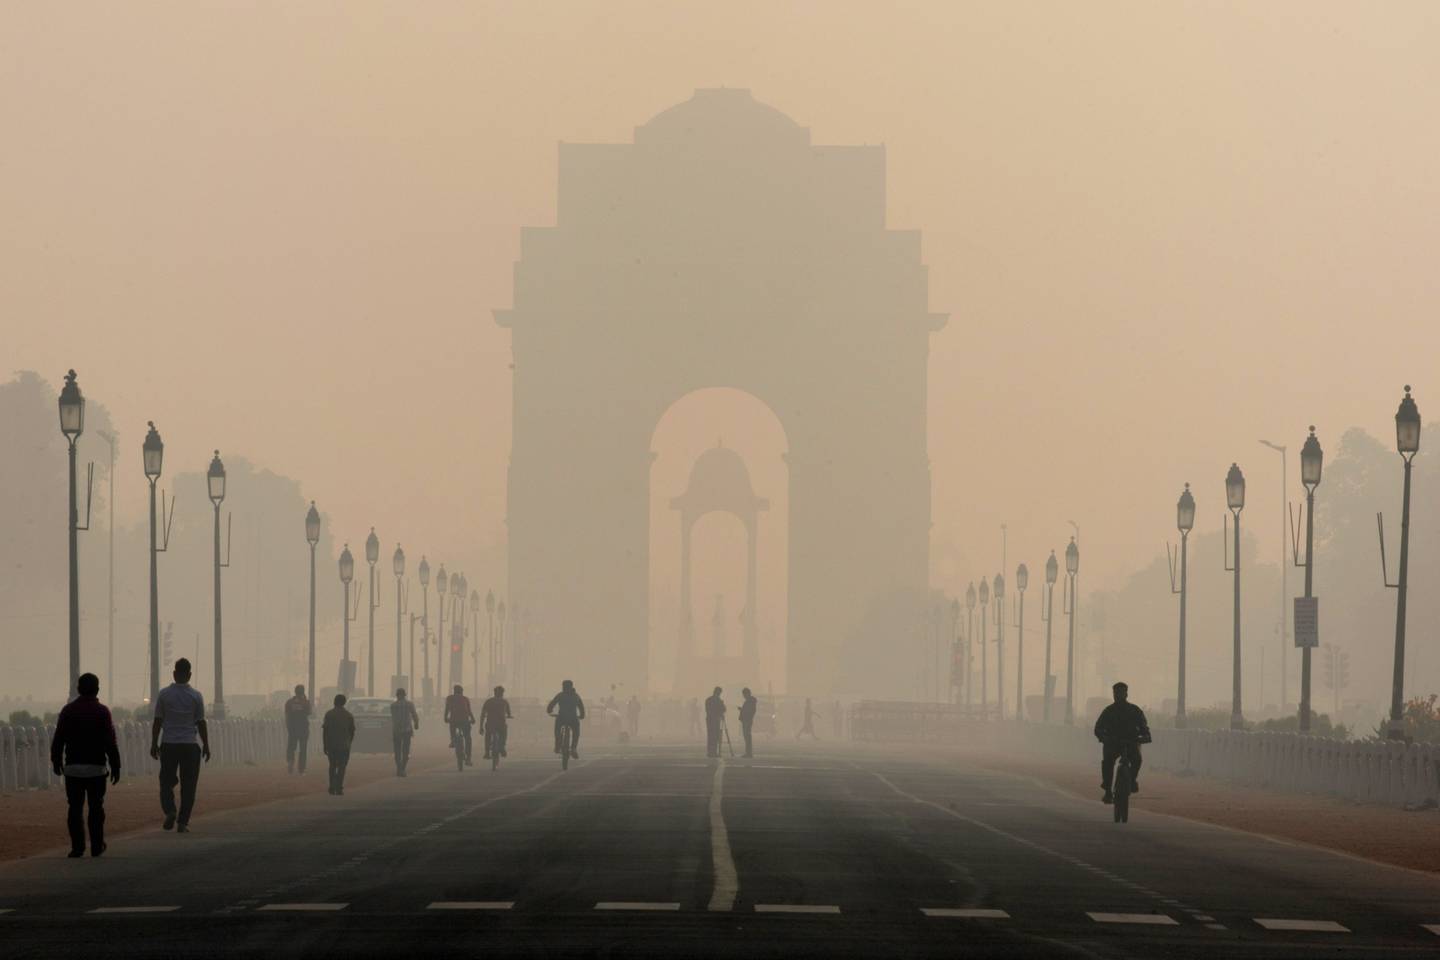 Pedestrians walk along Rajpath boulevard as India Gate monument stands shrouded in smog in New Delhi, India, on Tuesday, Nov. 5, 2019.